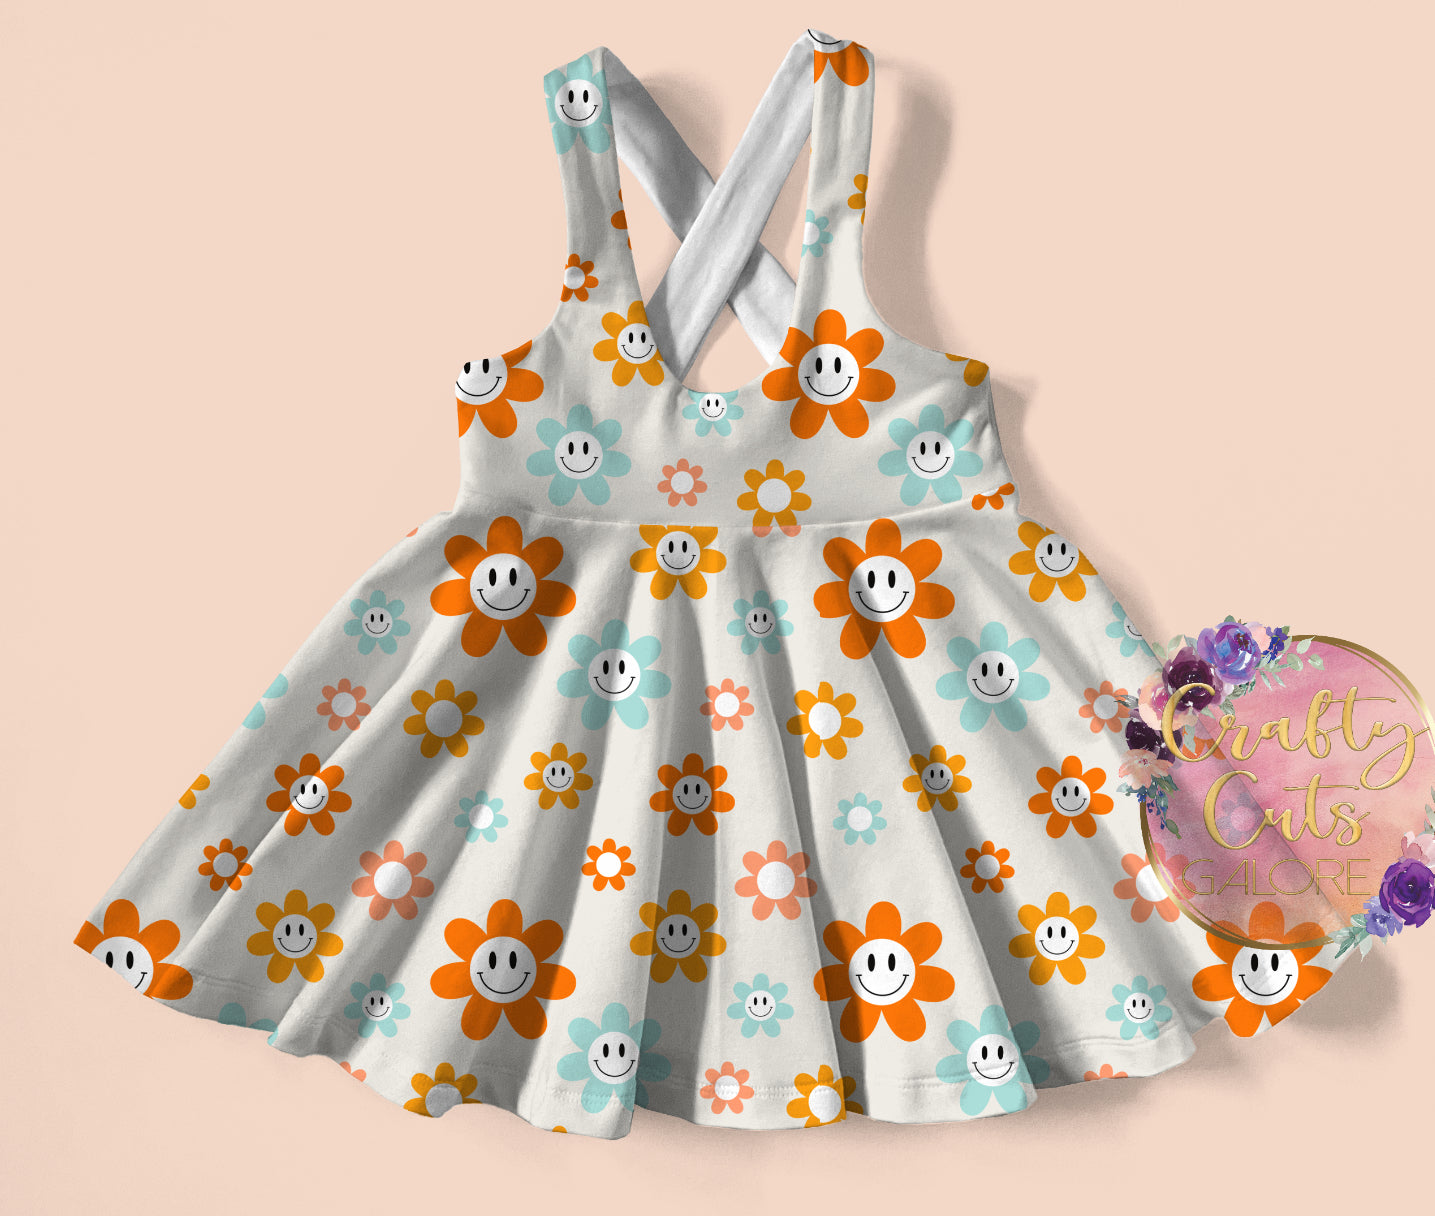 Groovy flowers - Build your own outfit